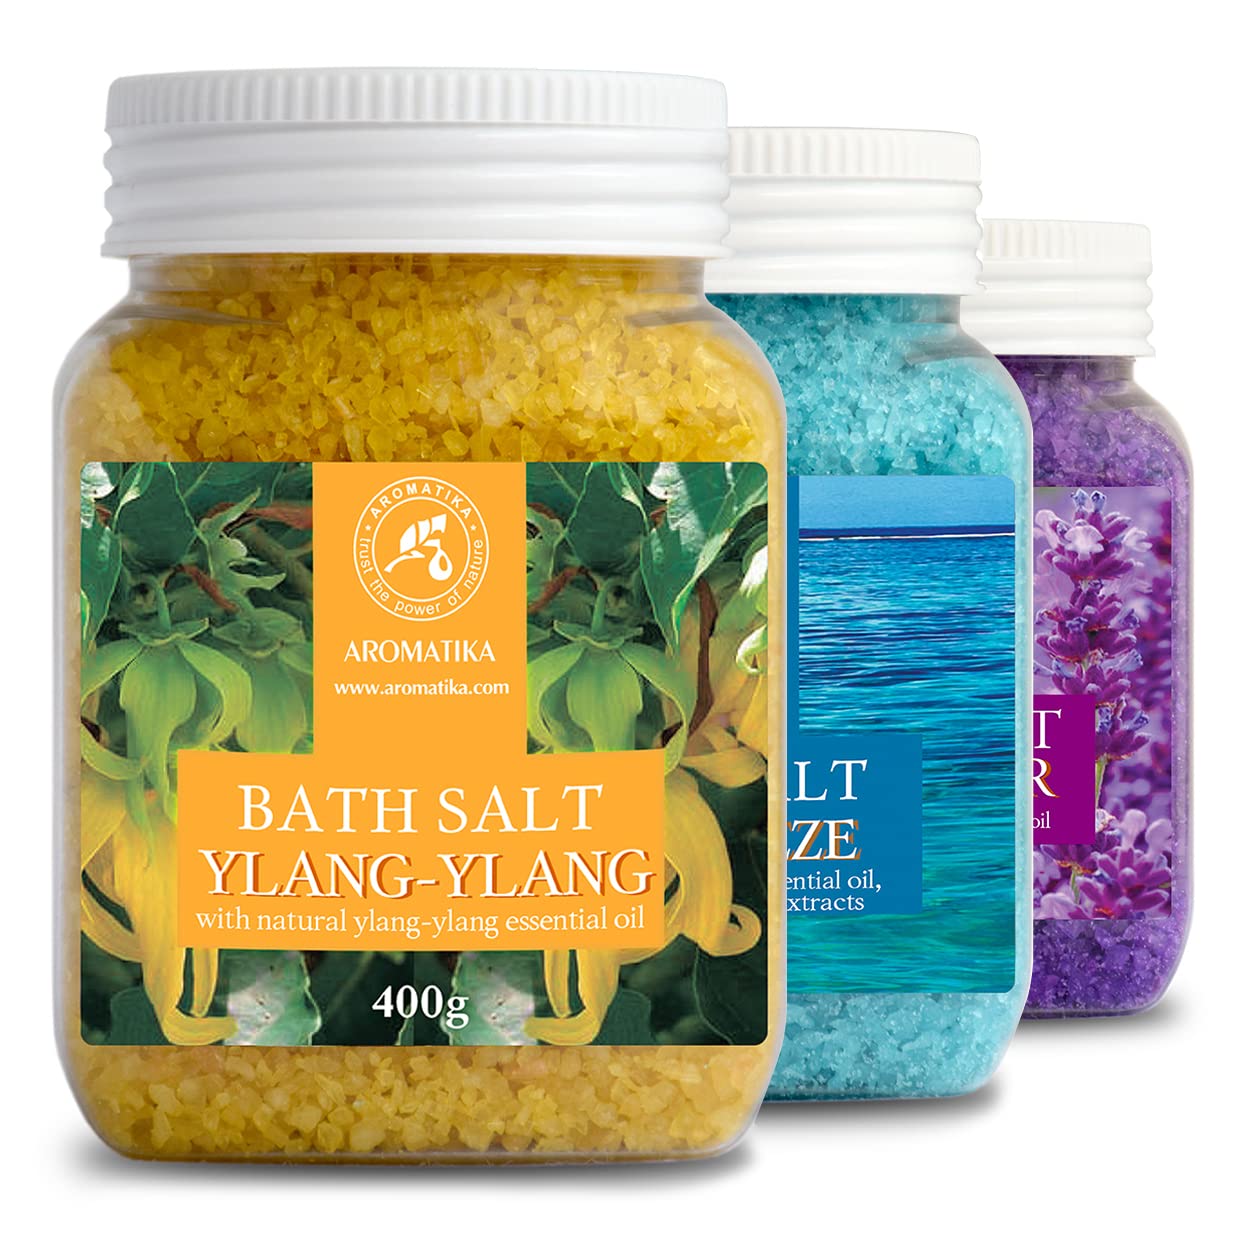 Bath Salts Set 42 Oz - Lavender - Sea Breeze - Ylang-Ylang - 100% Natural Essential Oil - Bathing - Body Care - Beauty - Relaxation - Spa